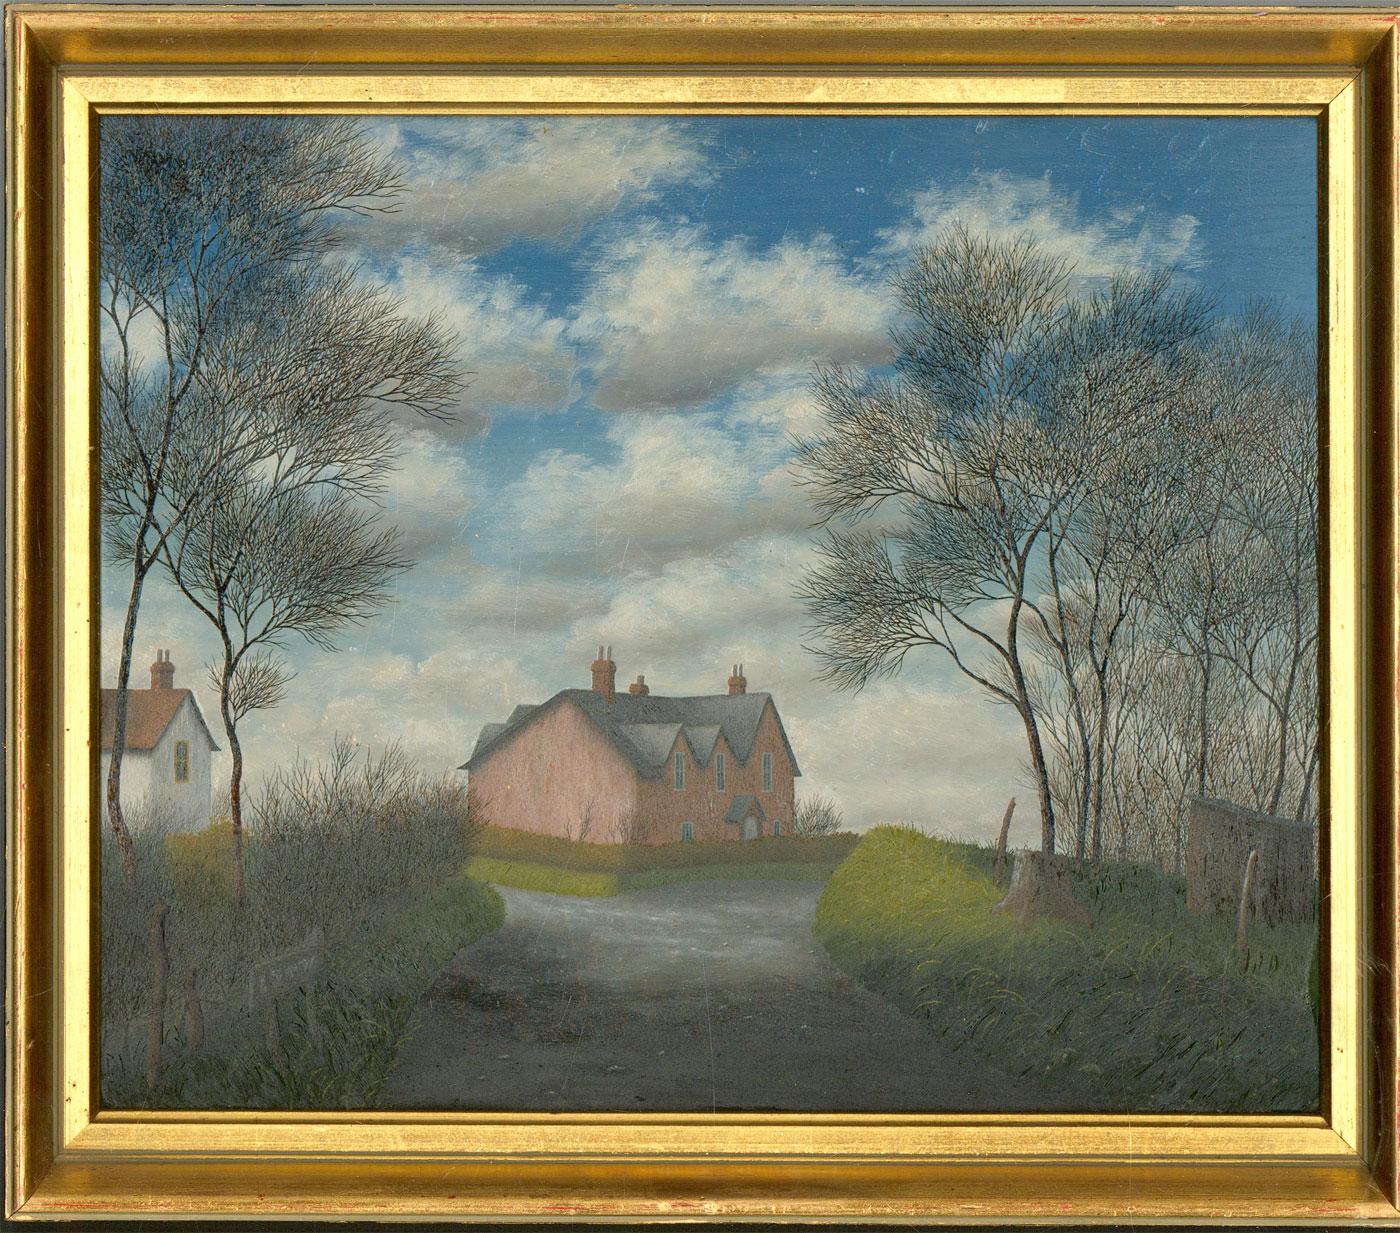 An energetic and bright oil painting from Broad. The eye is drawn through the bare trees, down the path and to the alluring pink house in the centre.

The piece is well presented in a tilted wooden frame.

Attached to the back is a label stating the